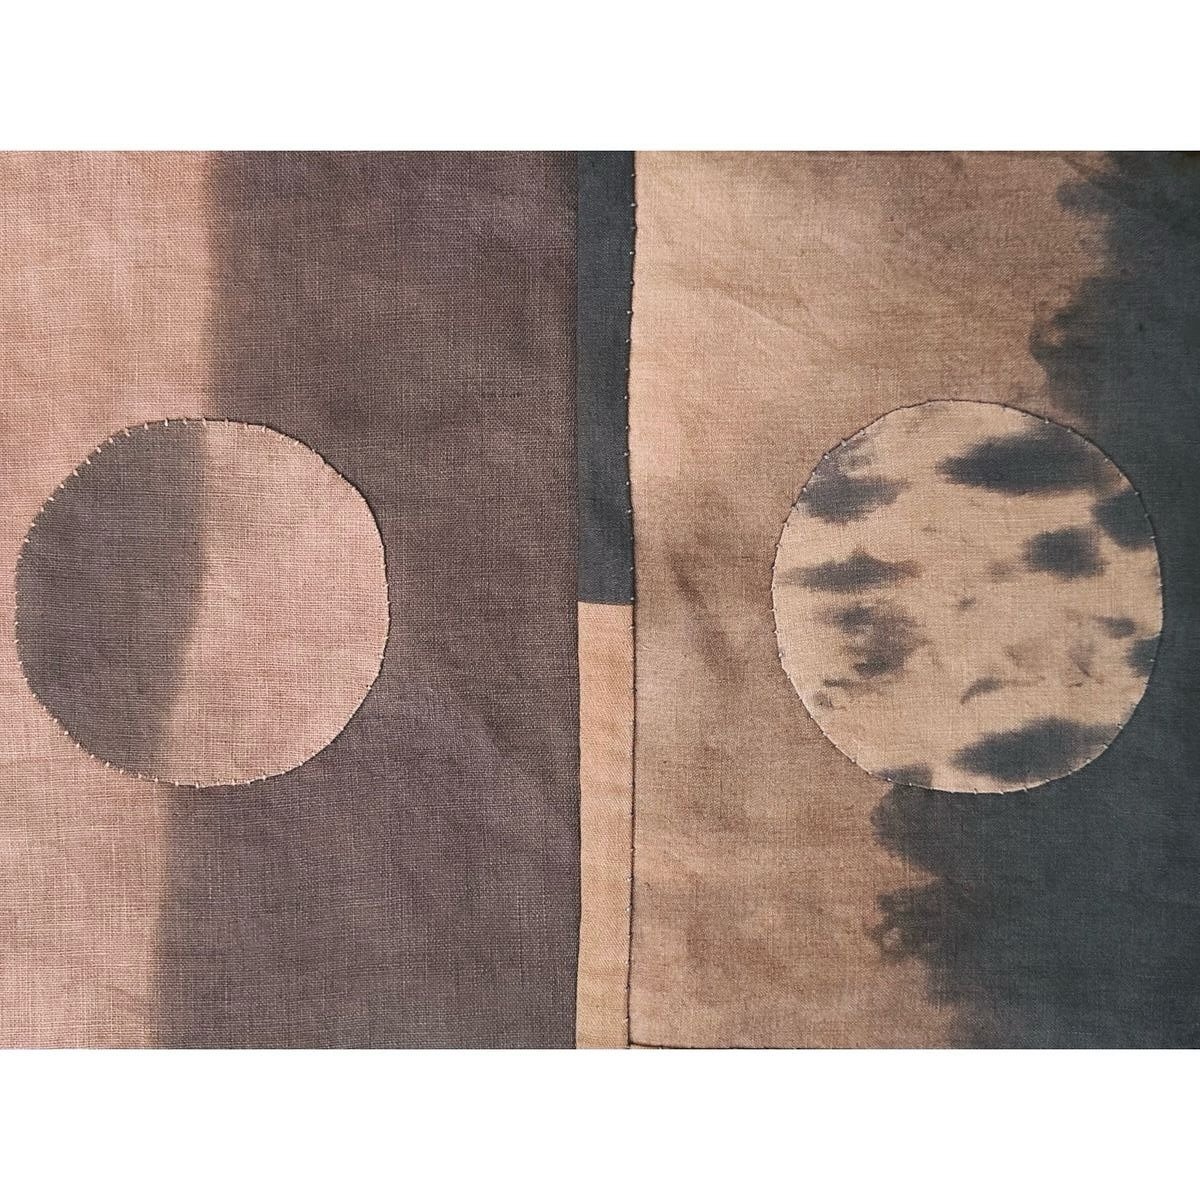 Moody moons. If I&rsquo;d had the foresight I would have e posted this on the solar eclipse - ah well!

Left avocado skins and stones, right tea, both modified with iron and featuring hand appliqu&eacute;d circles.

Which is your favourite?
.
.
.
.
.